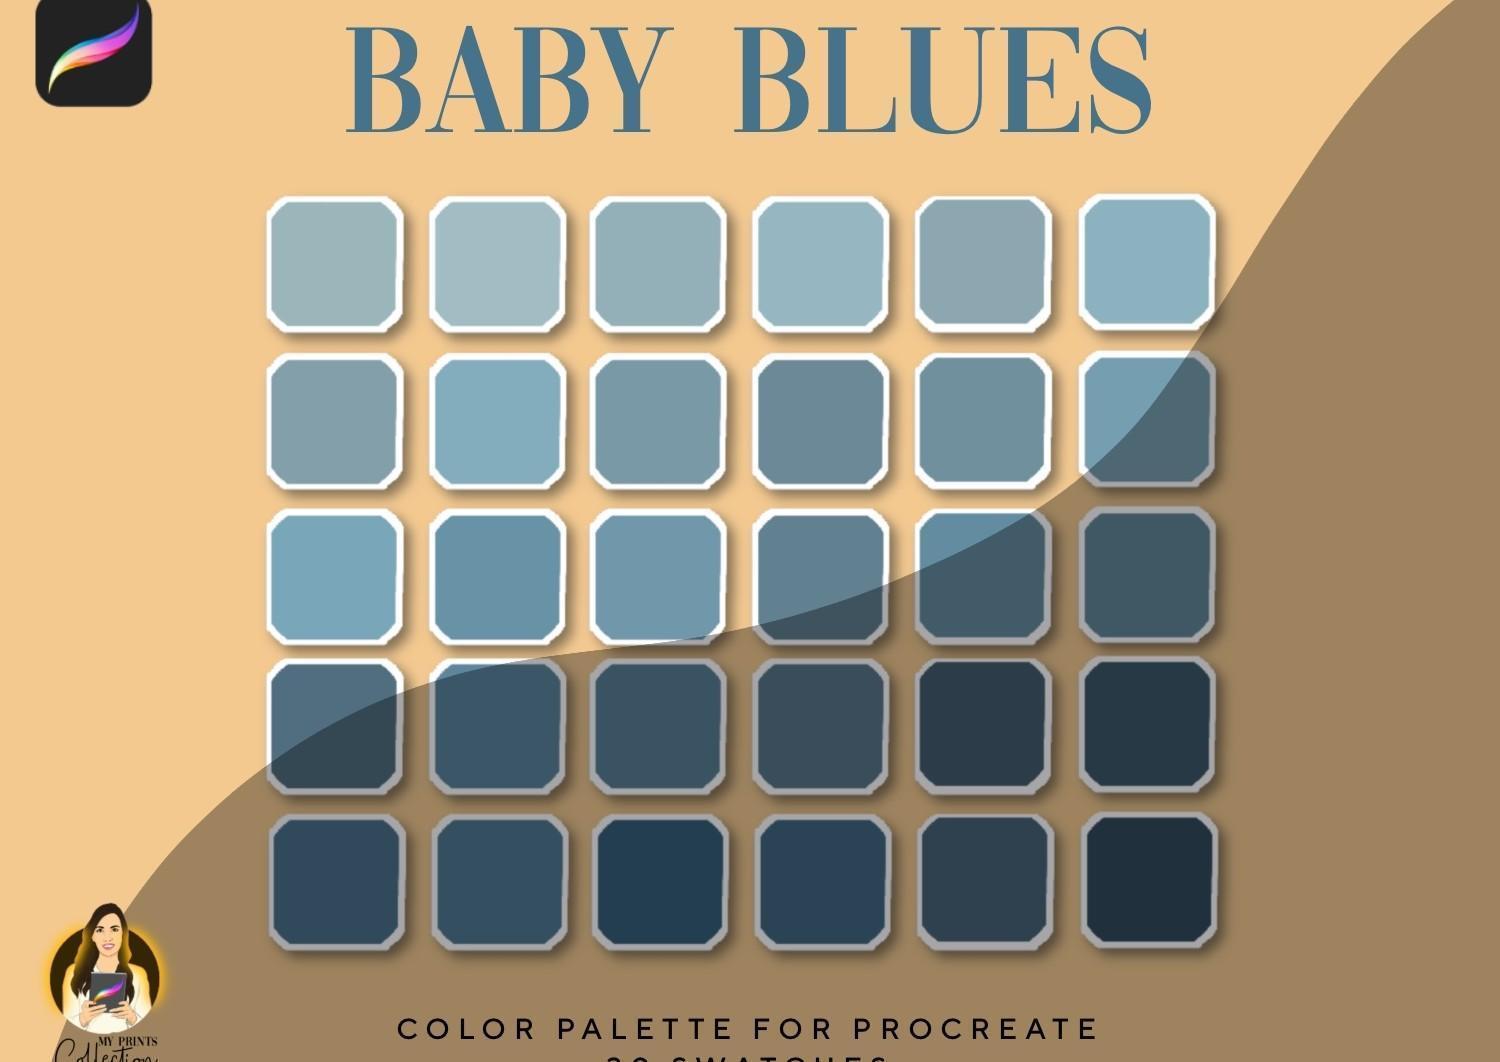 Baby Blues Procreate Color Palette | 30 Swatch | Ocean Tones | Water | Cosy Blue Tones - mpc procreate swatch baby blues cover -